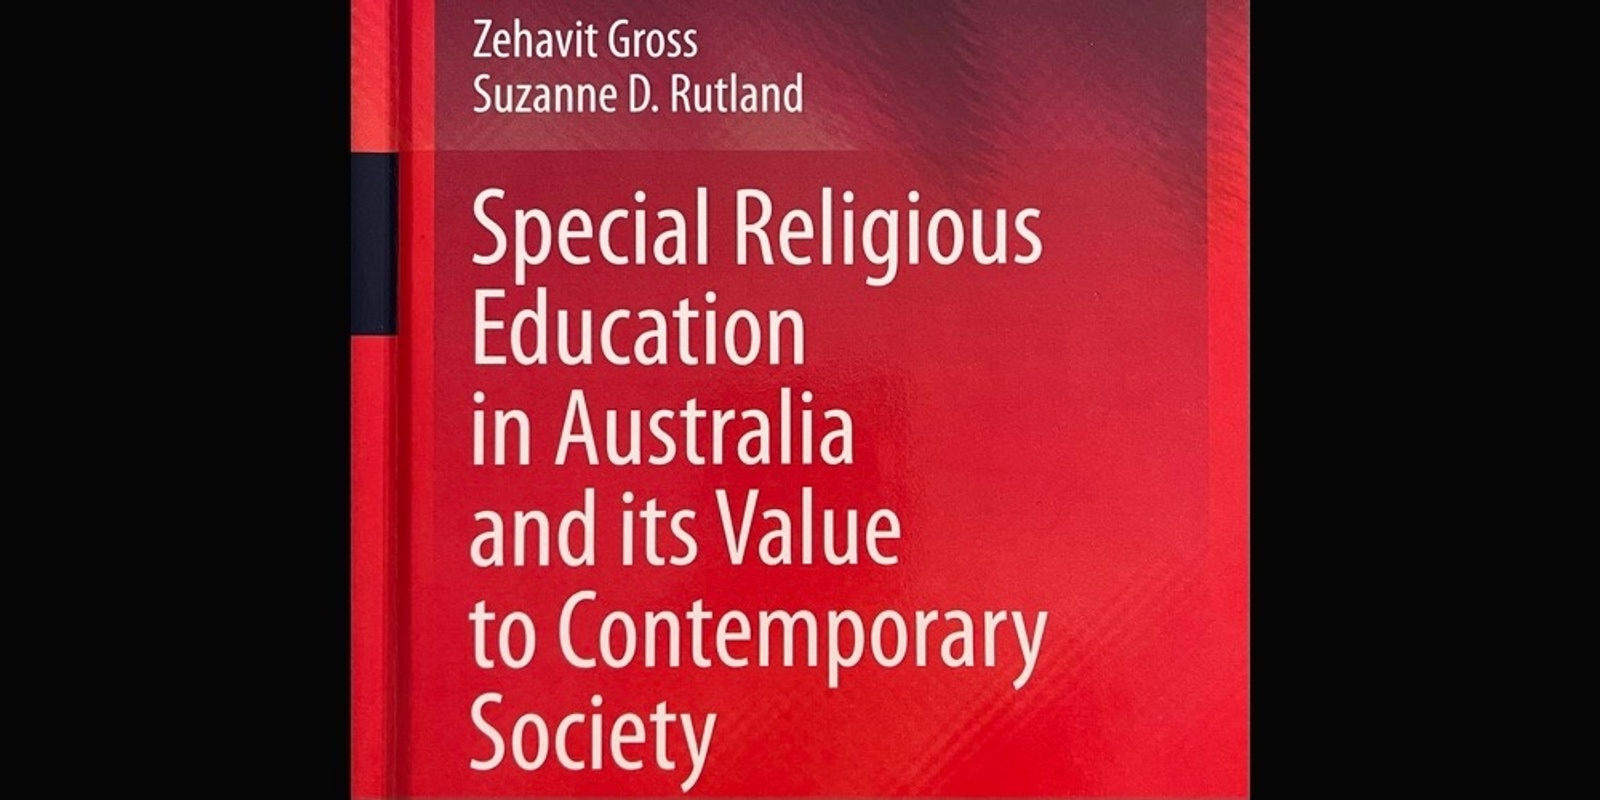 Banner image for Launch of the book “Special Religious Education in Australia and its Value to Contemporary Society”